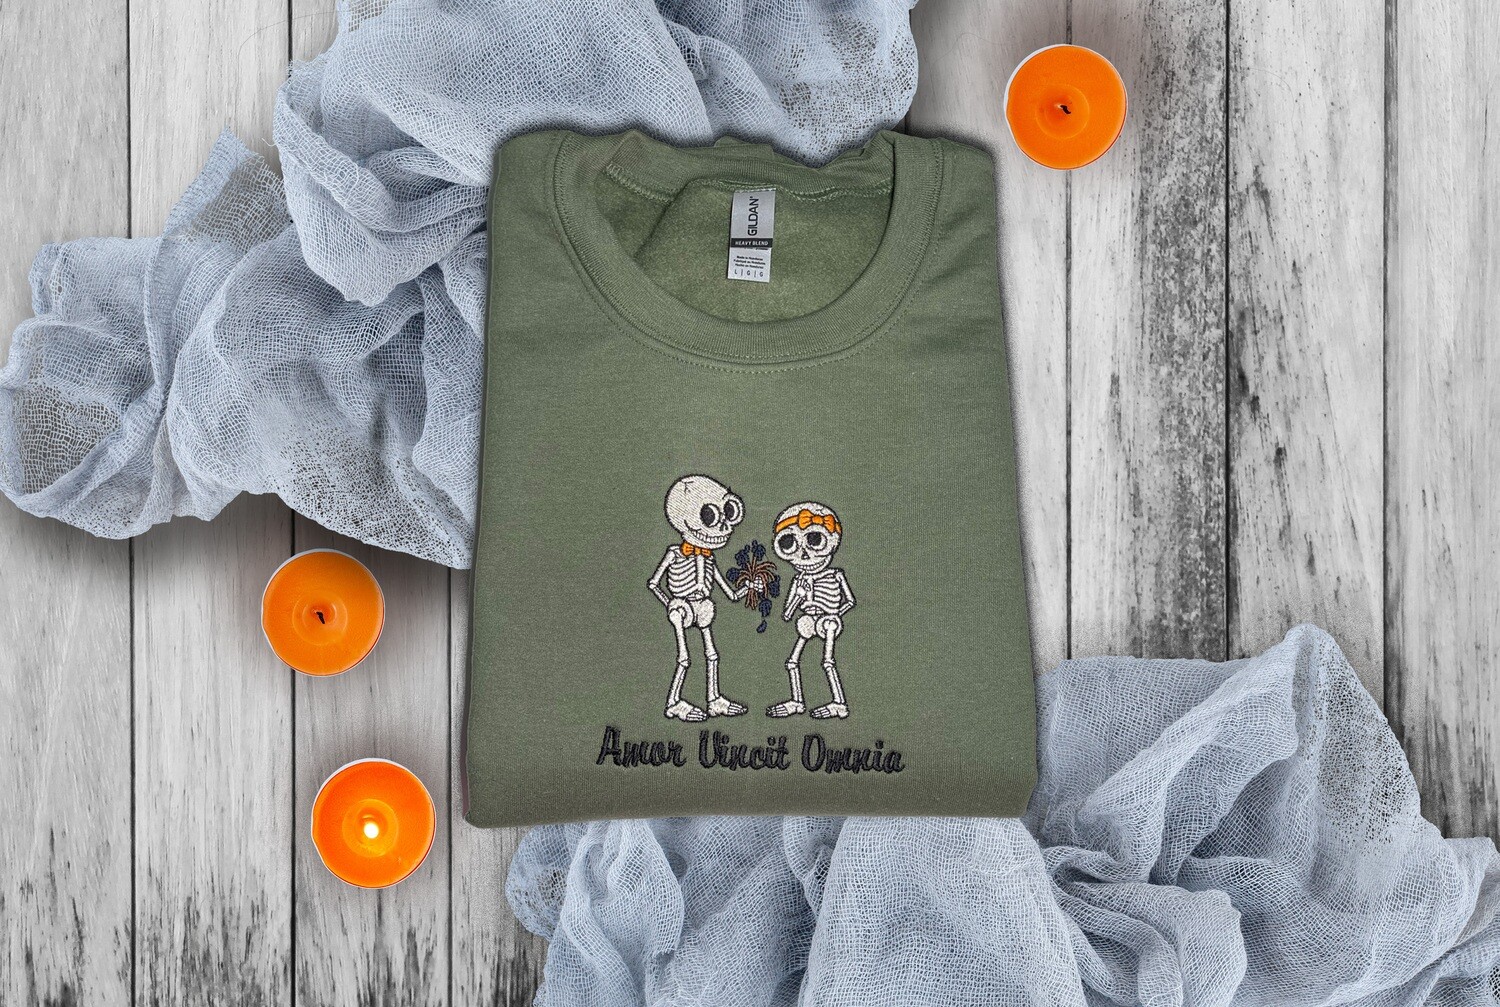 Amor Vincit Omnia Skeletons, Latin for Love Conquers All, Embroidered Halloween Sweatshirt, Unisex